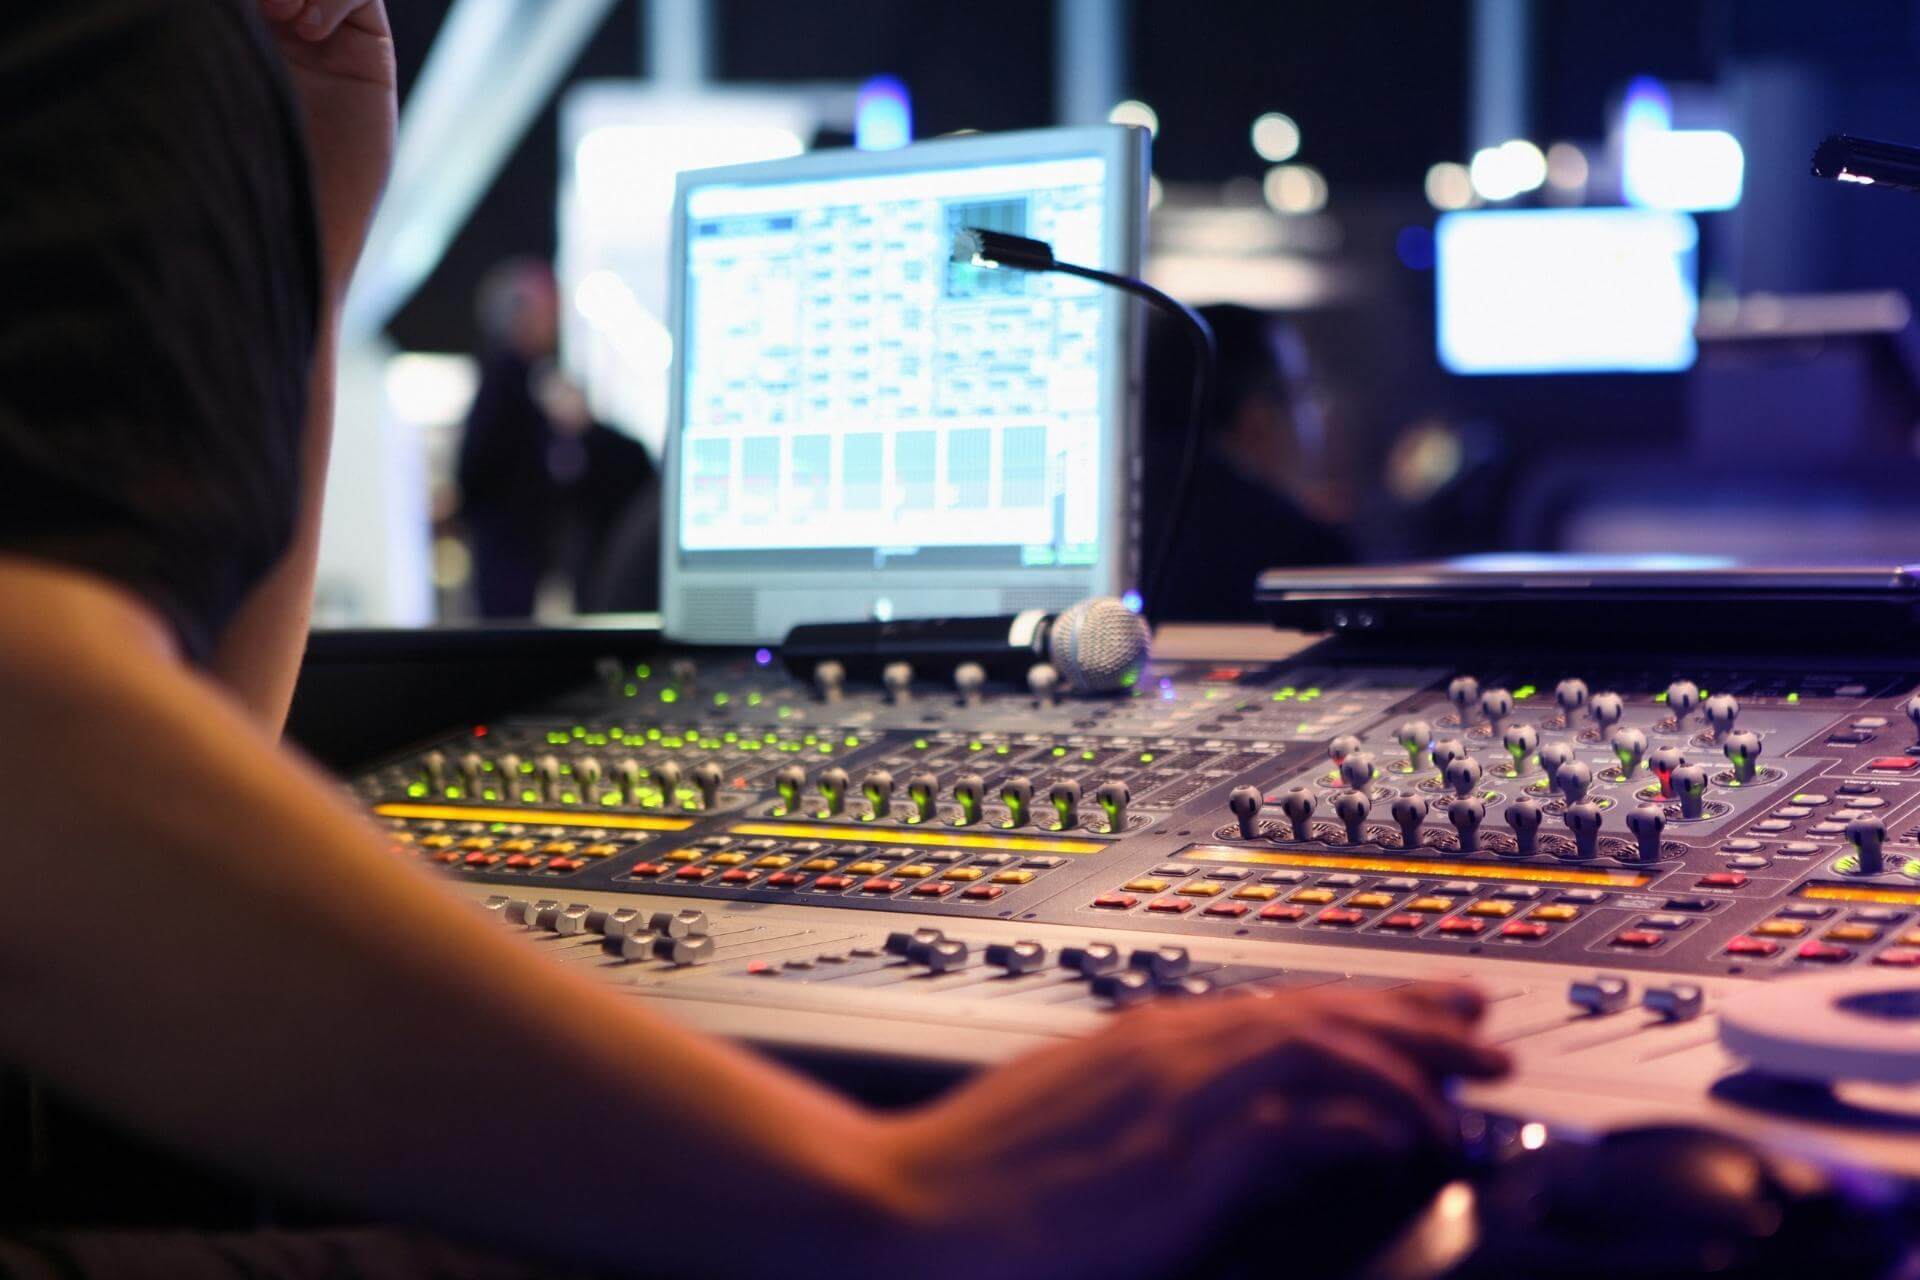 sound technician mixing at a sound board